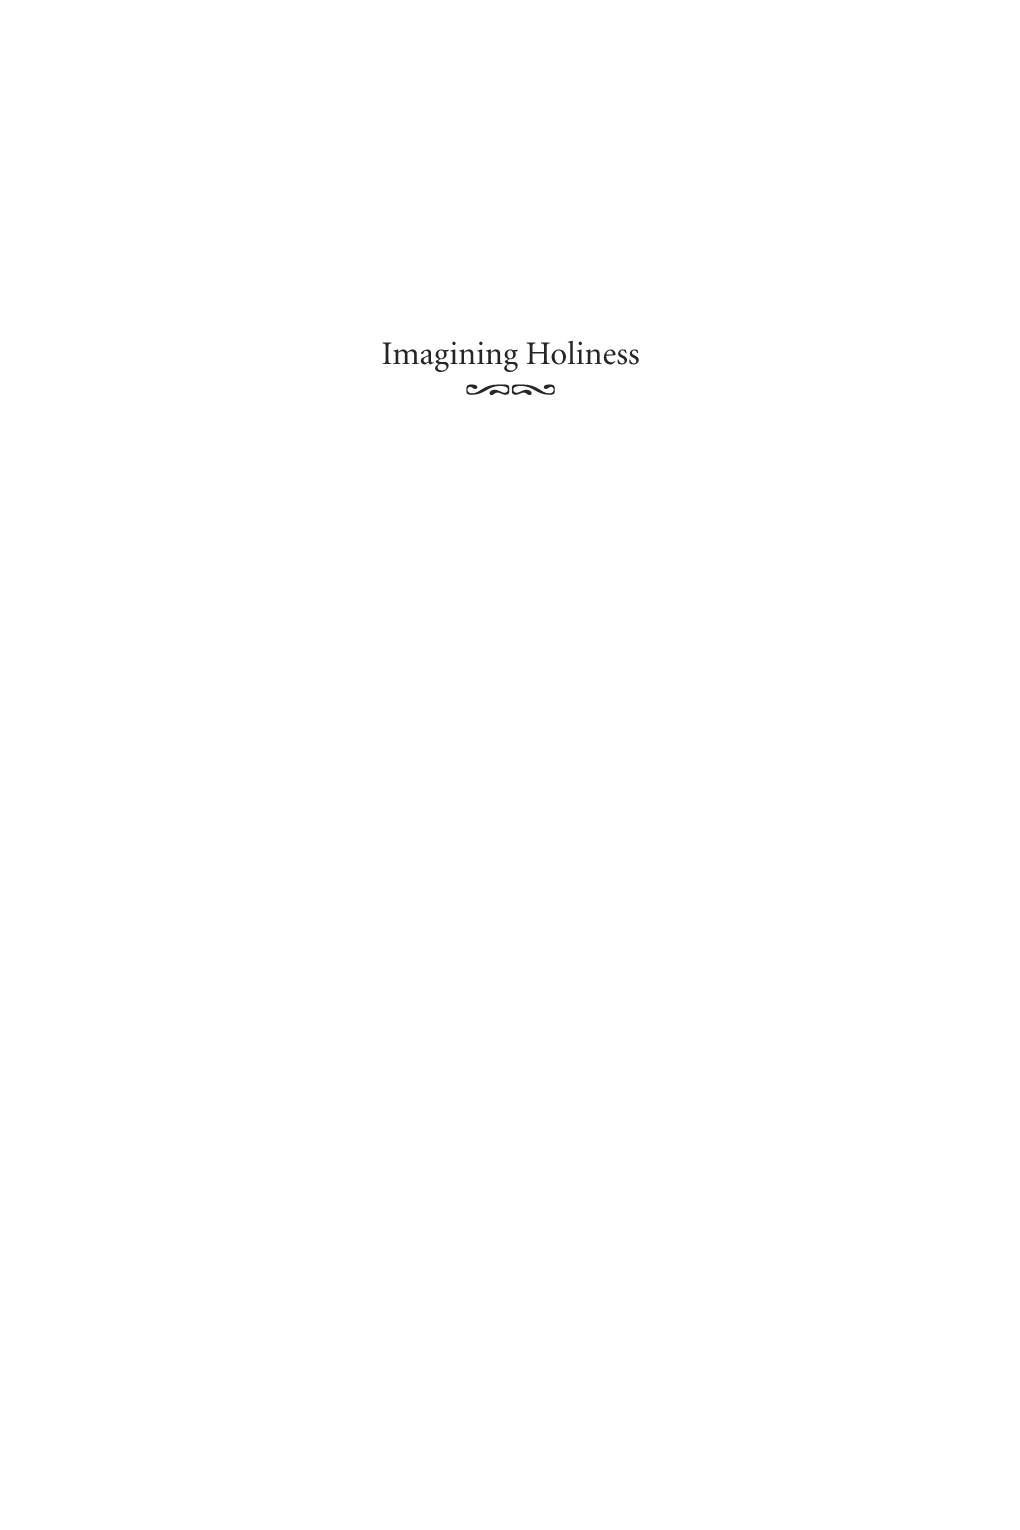 Imagining Holiness ᪎᪏ Mcgill-Queen’S Studies in the History of Religion Volumes in This Series Have Been Supported by the Jackman Foundation of Toronto